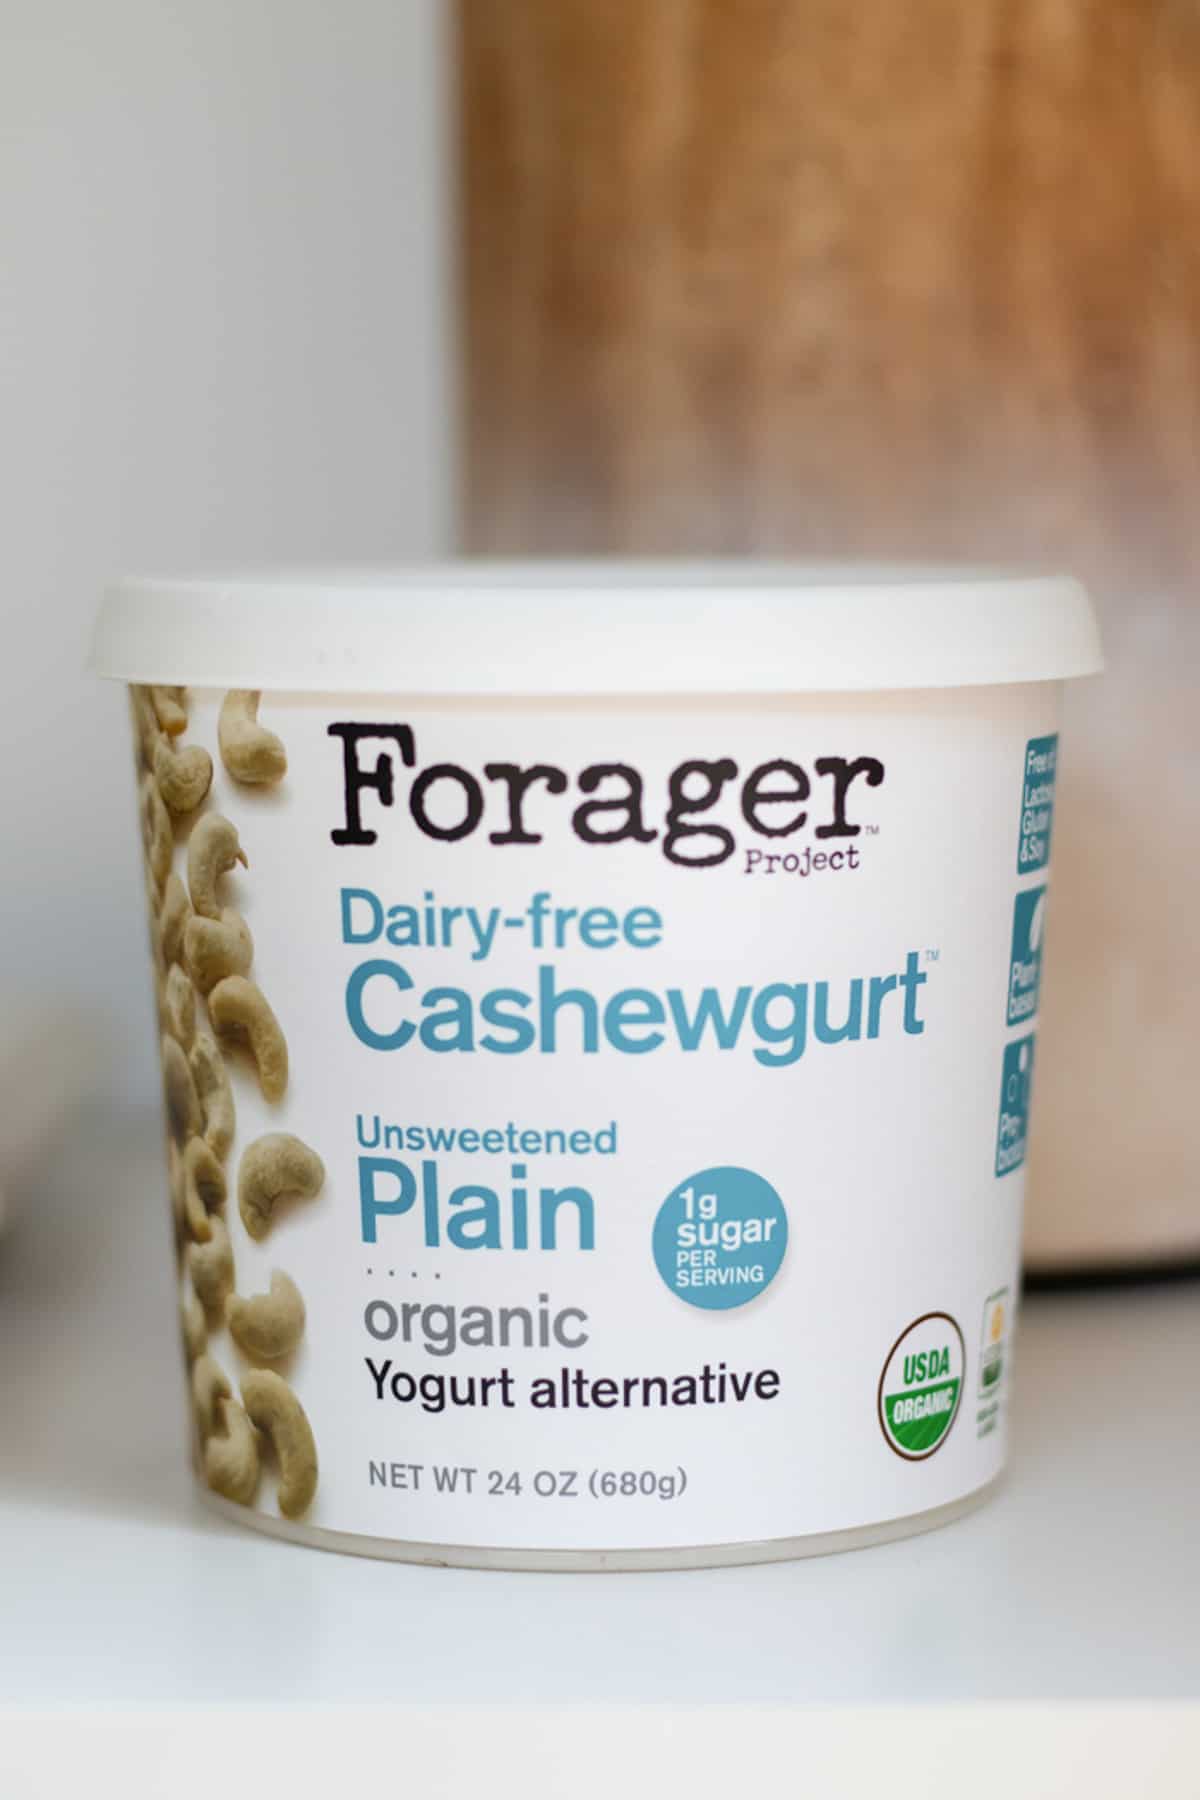 a container of Forager dairy-free cashewgurt.